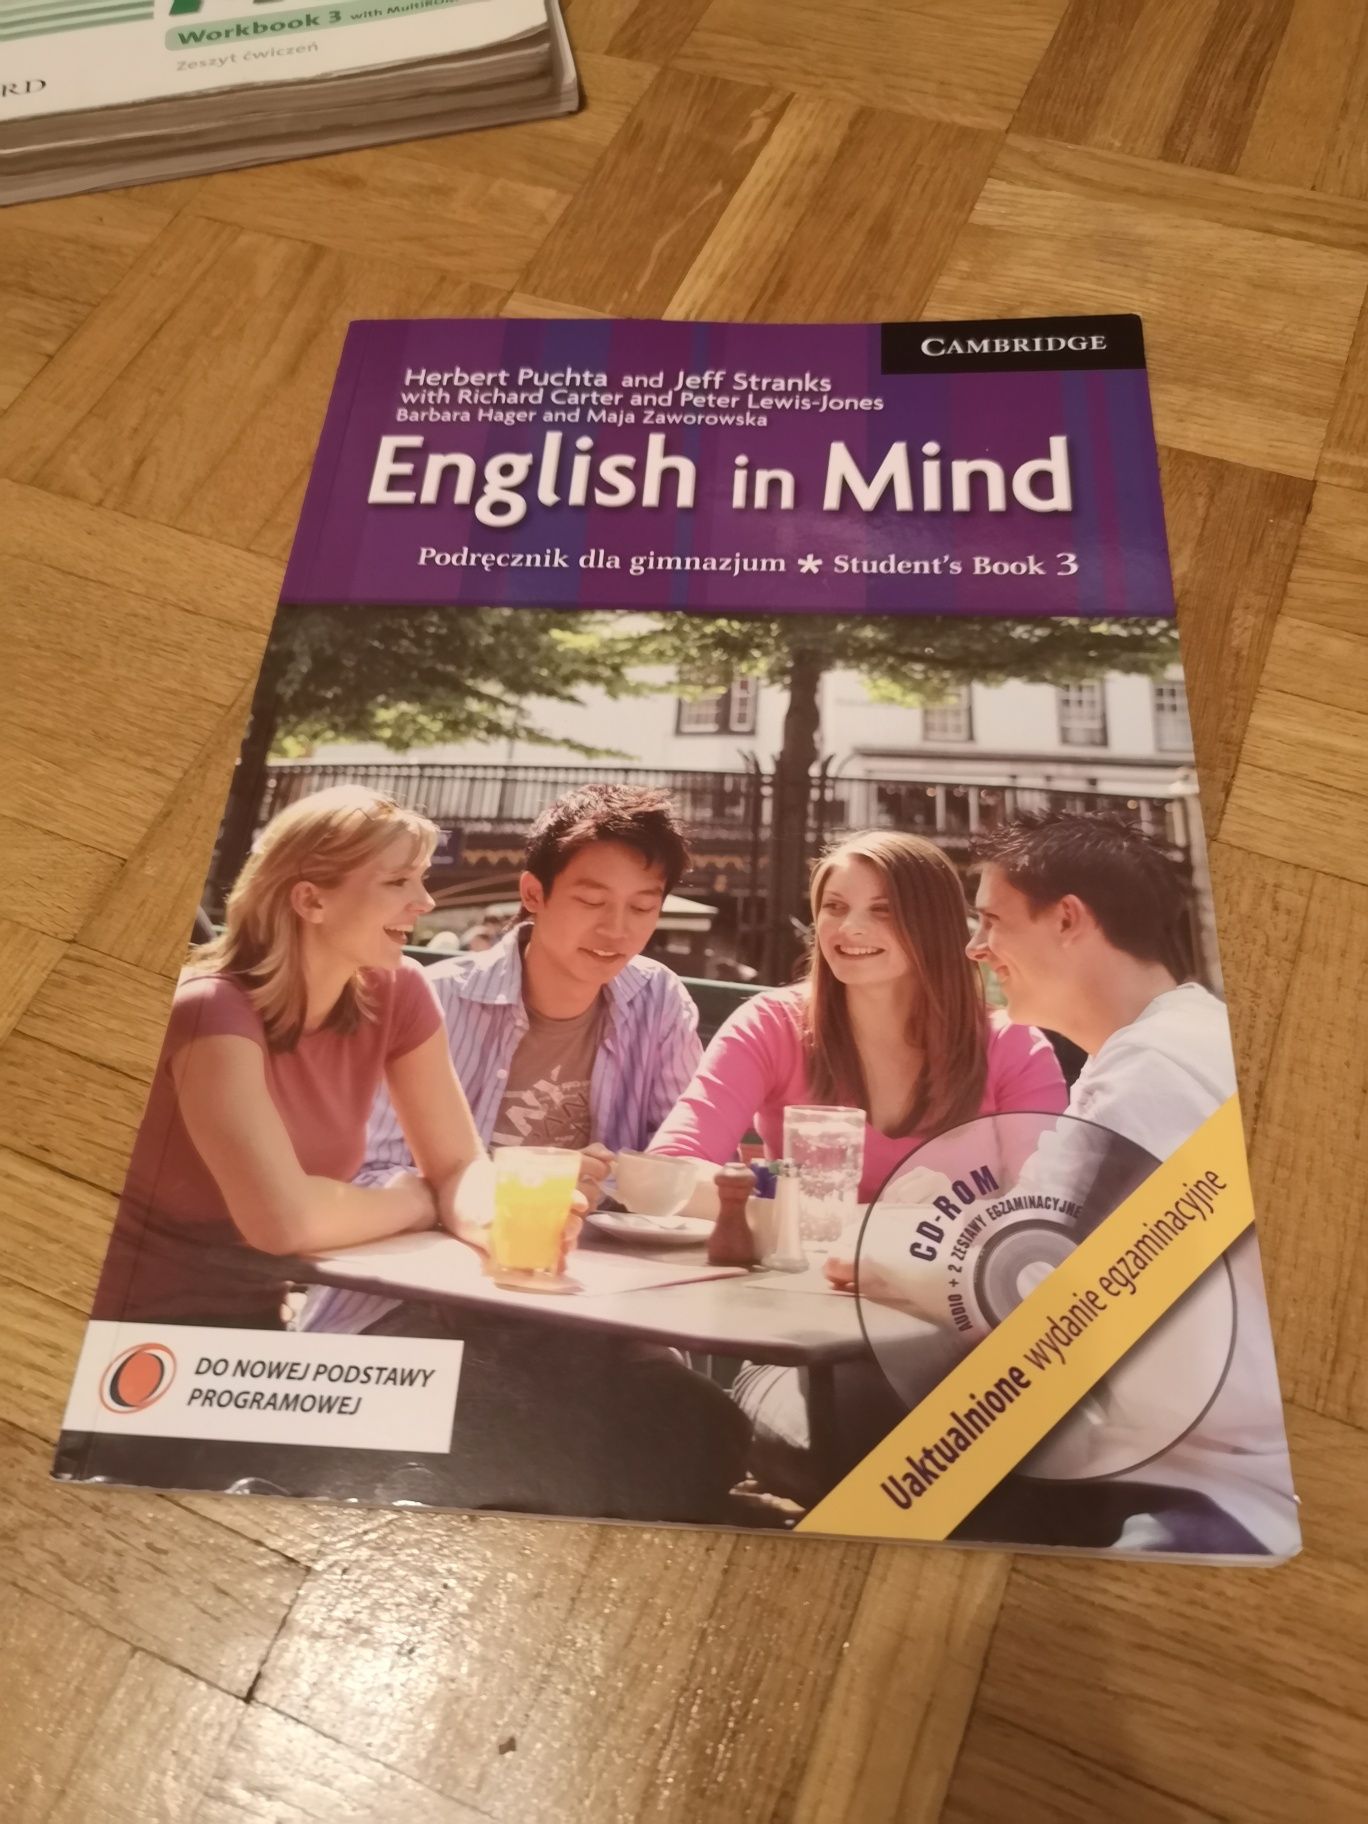 English in mind students book 3